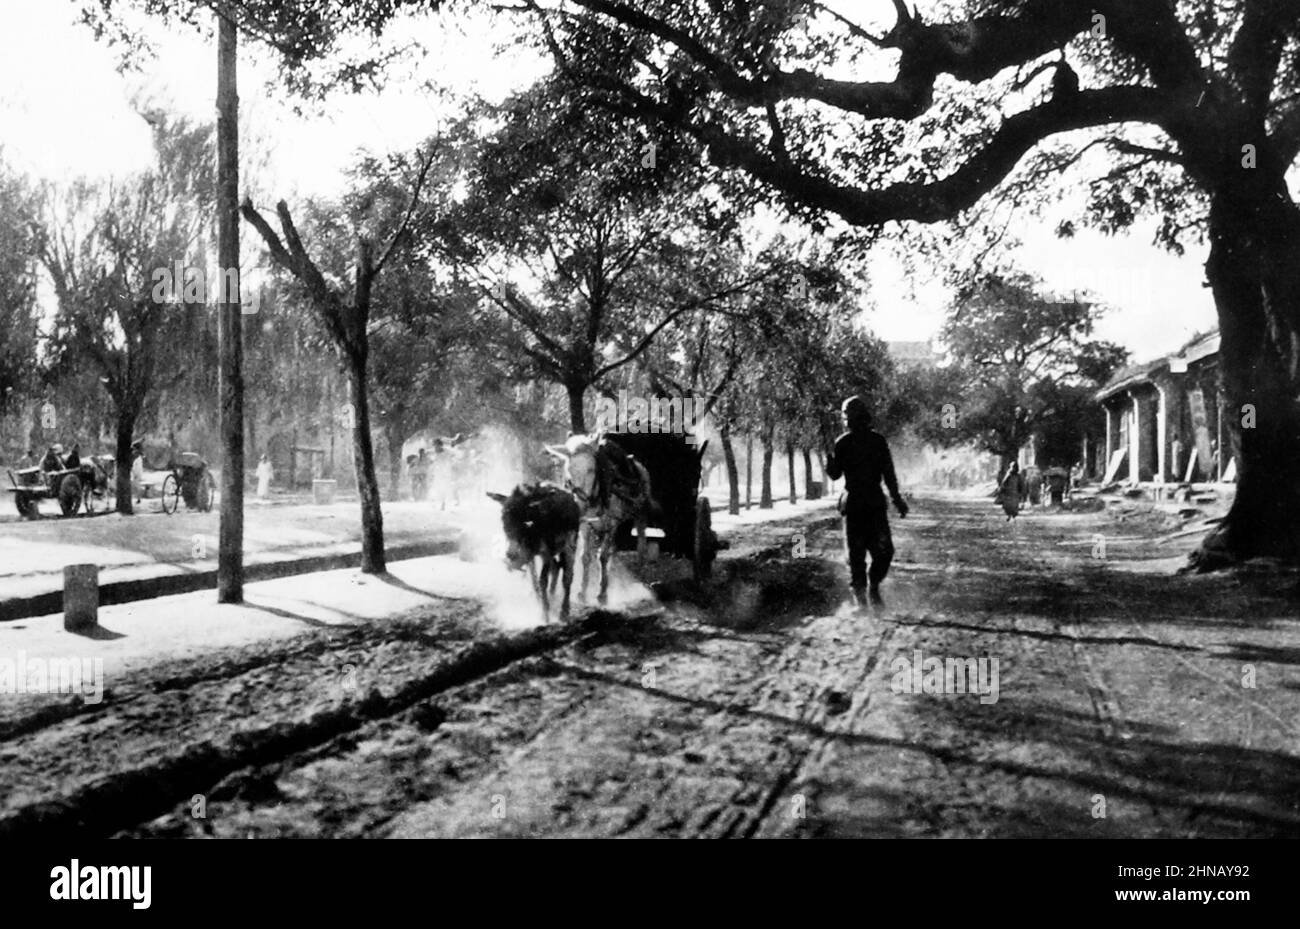 The Old Cart Road, Beijing, China, early 1900s Stock Photo